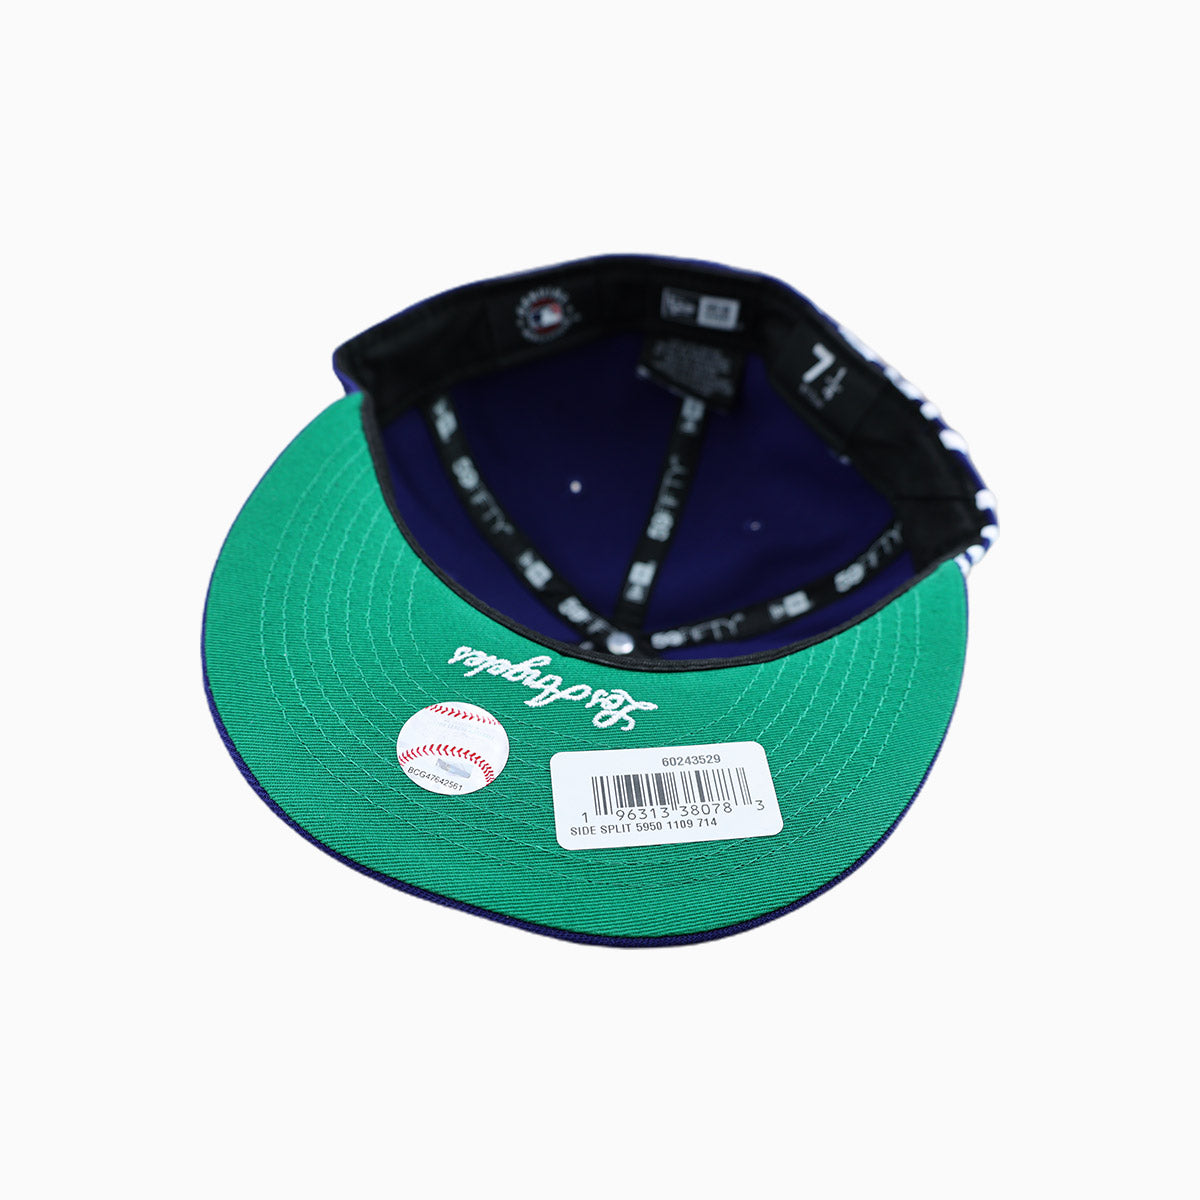 new-era-los-angeles-dodgers-mlb-59fifty-fitted-hat-60243529